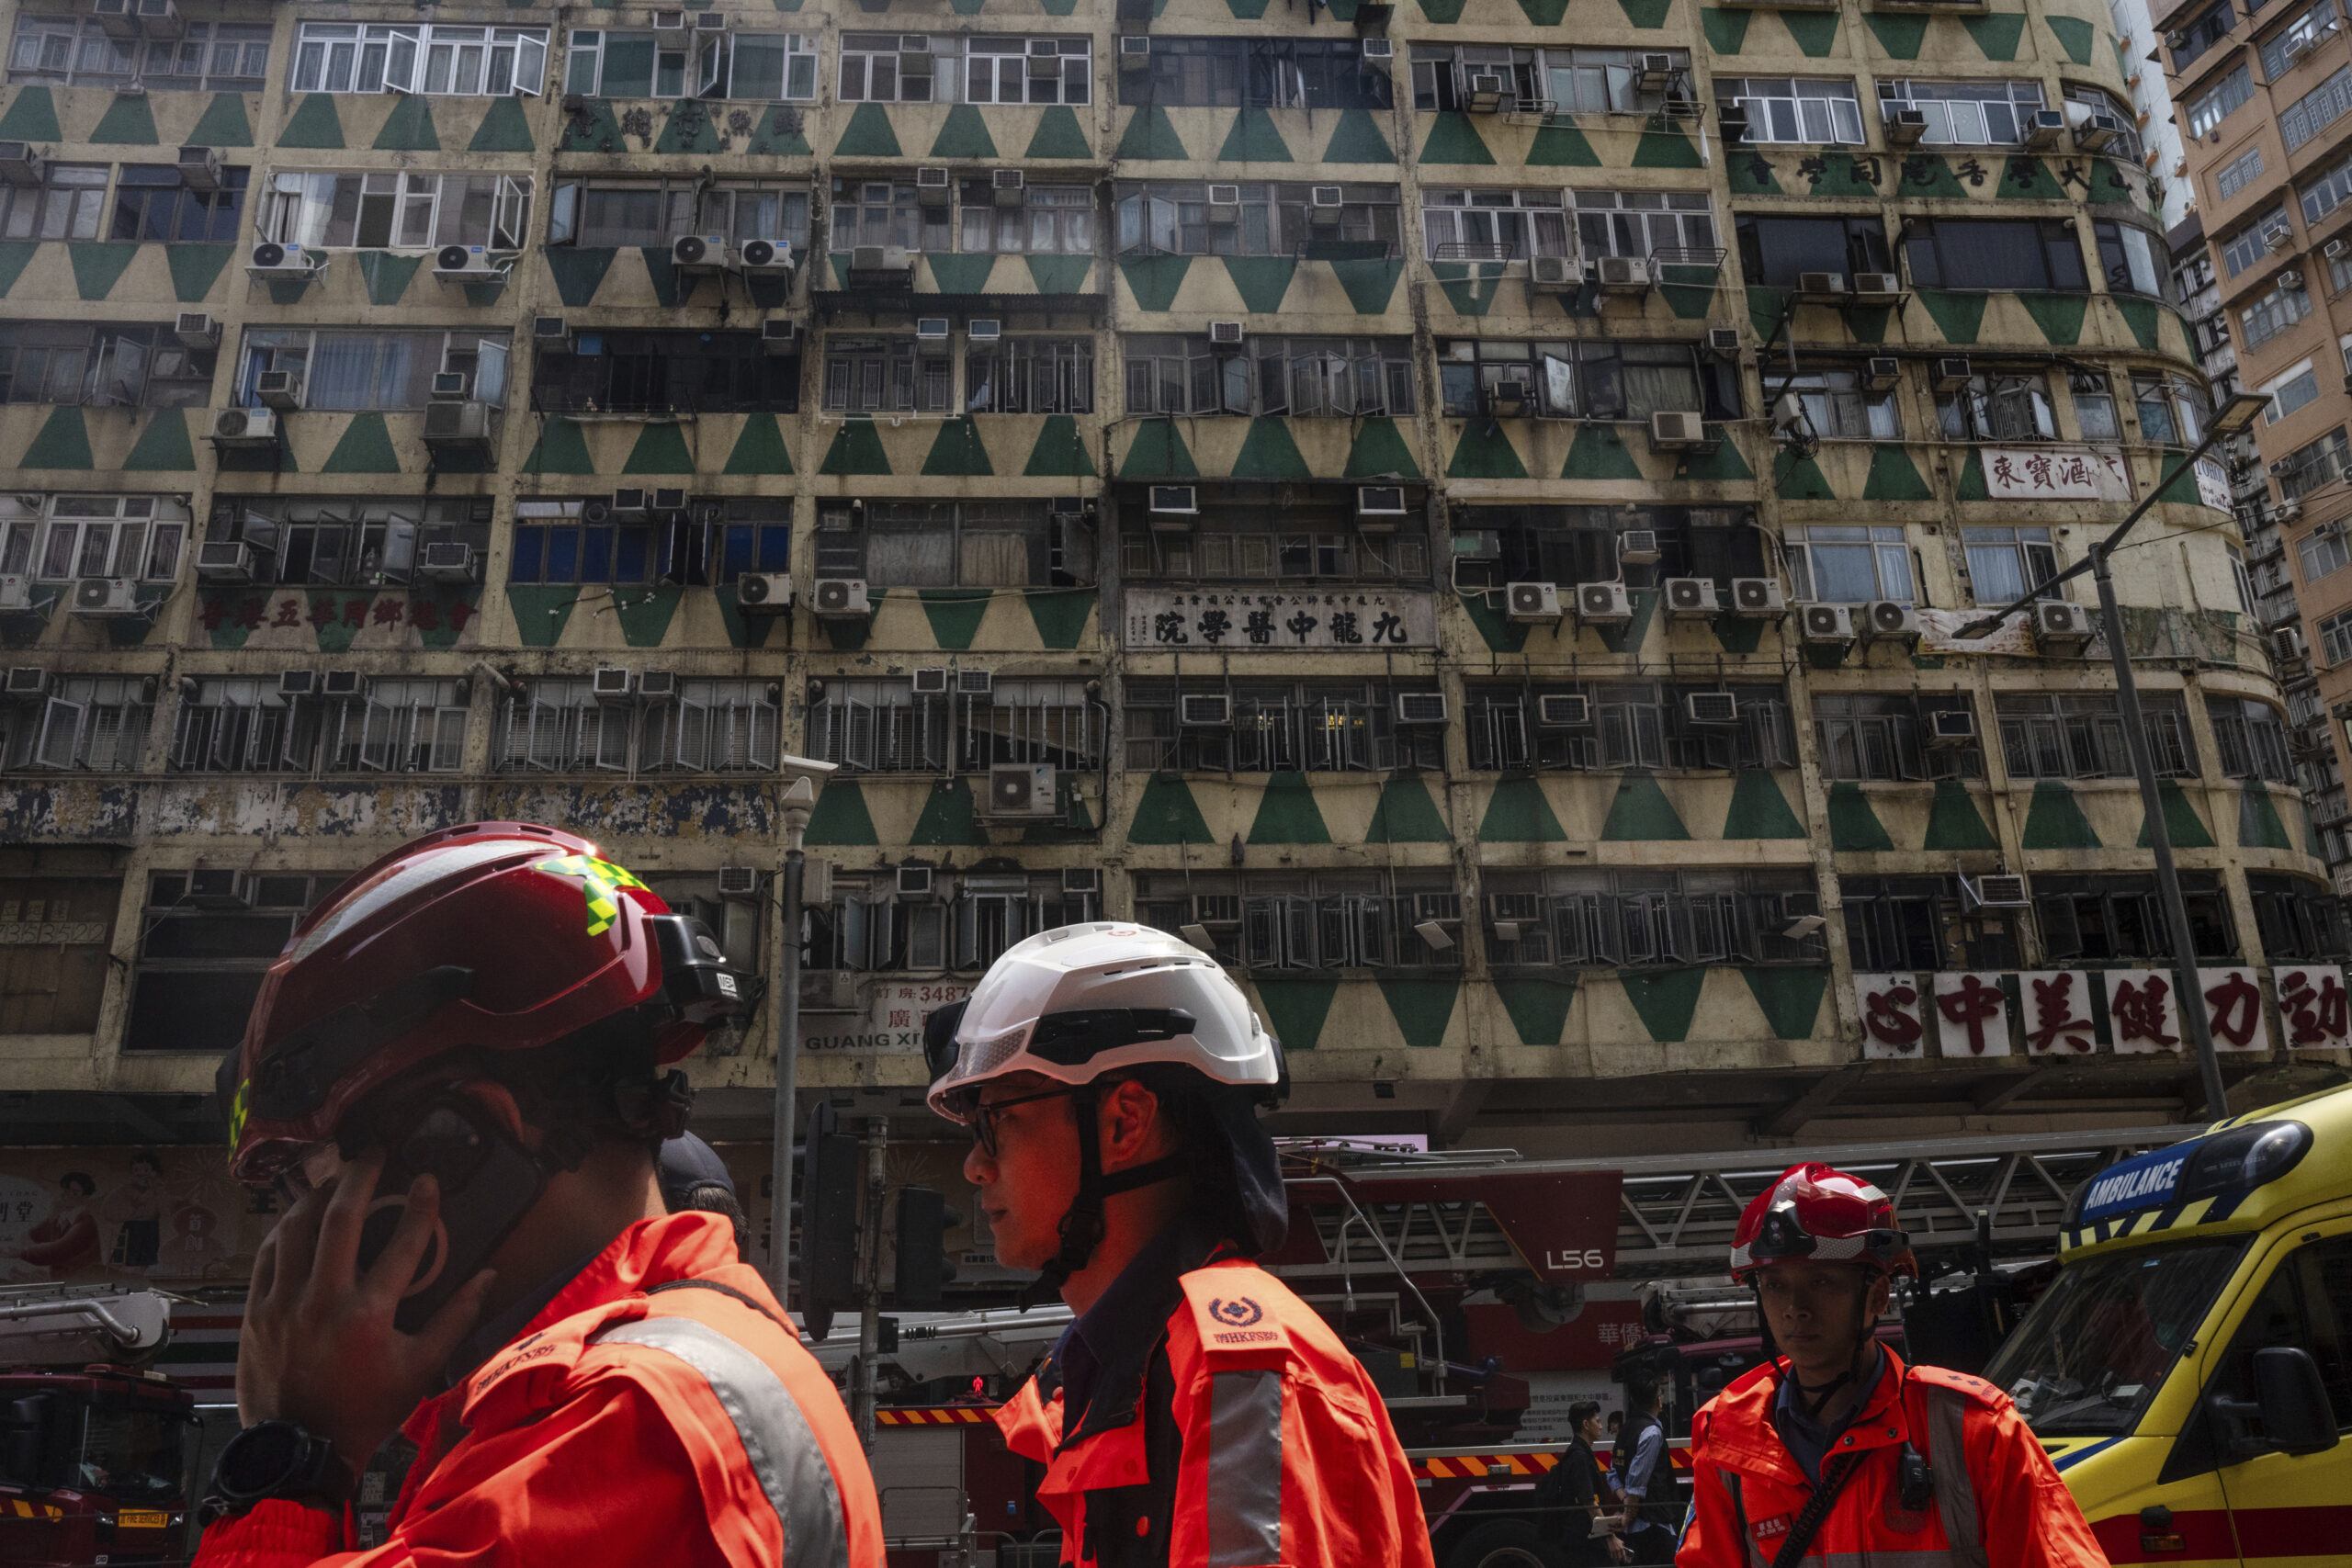 DWM says another Filipino injured in Hong Kong fire